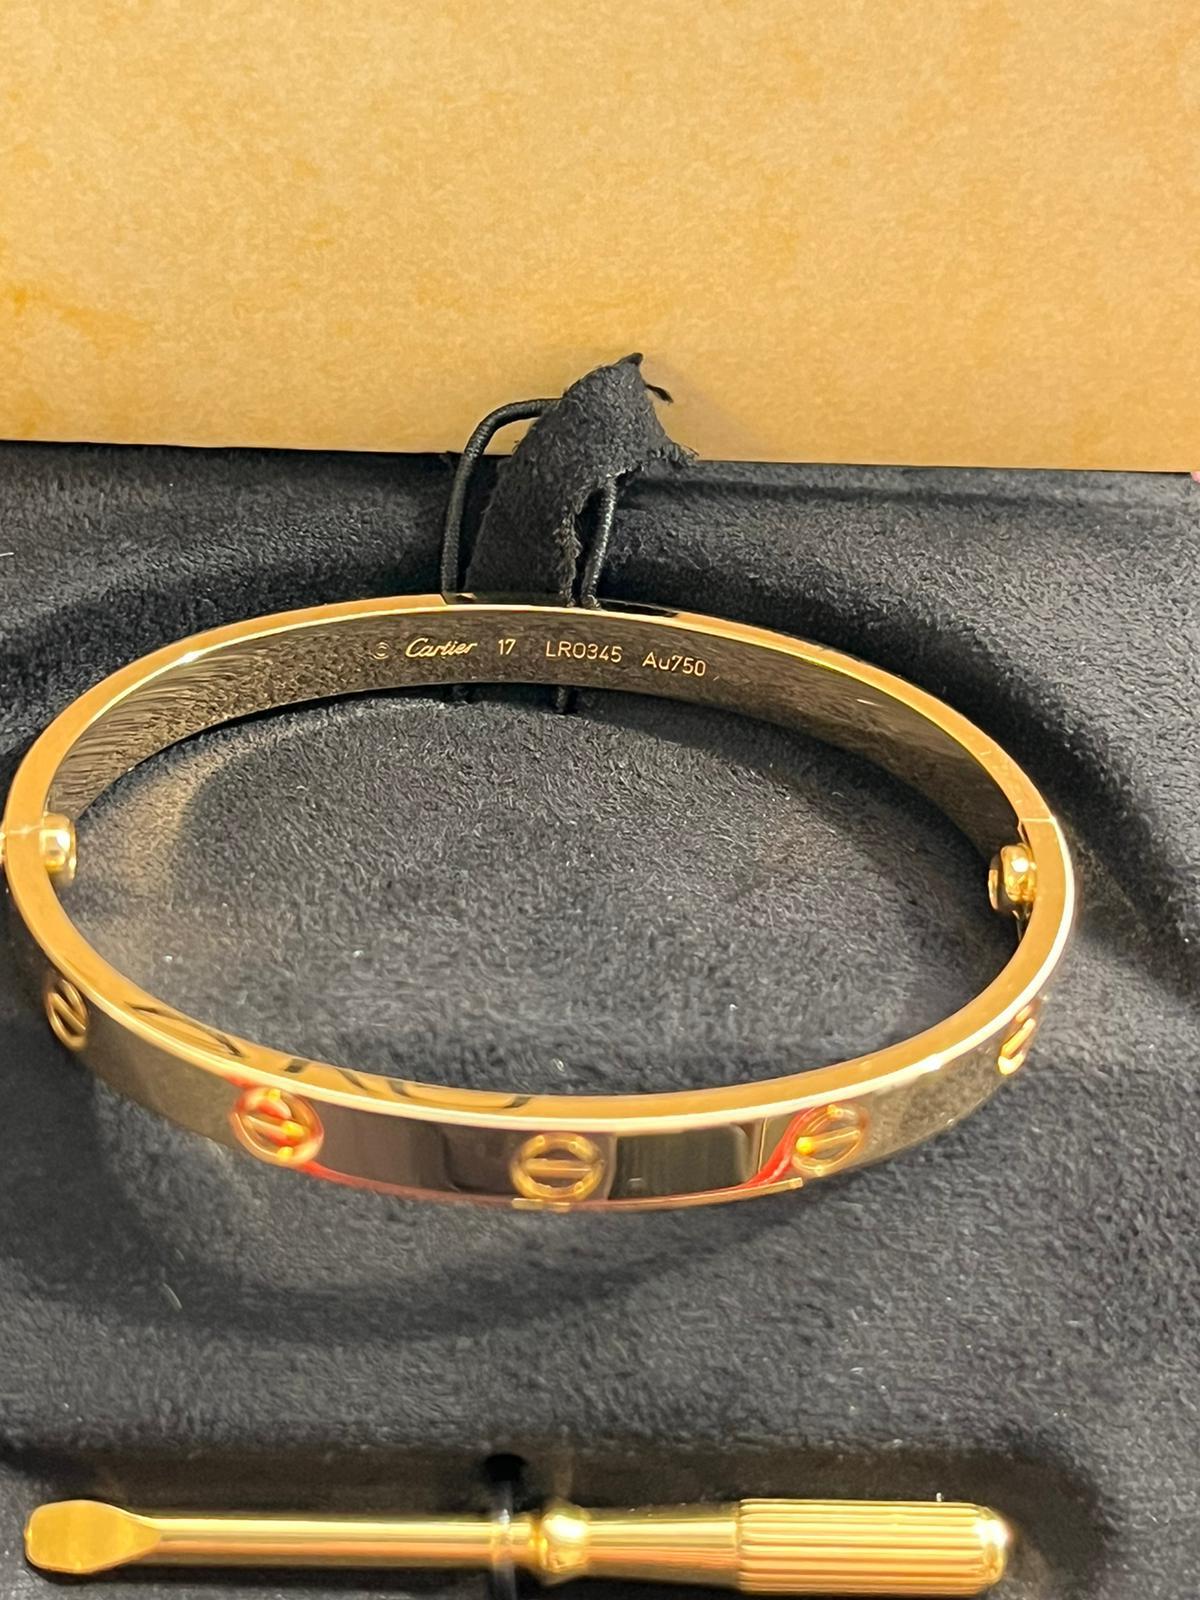 Cartier Love Bracelet 17 Size 18K Yellow Gold with Screwdriver 5